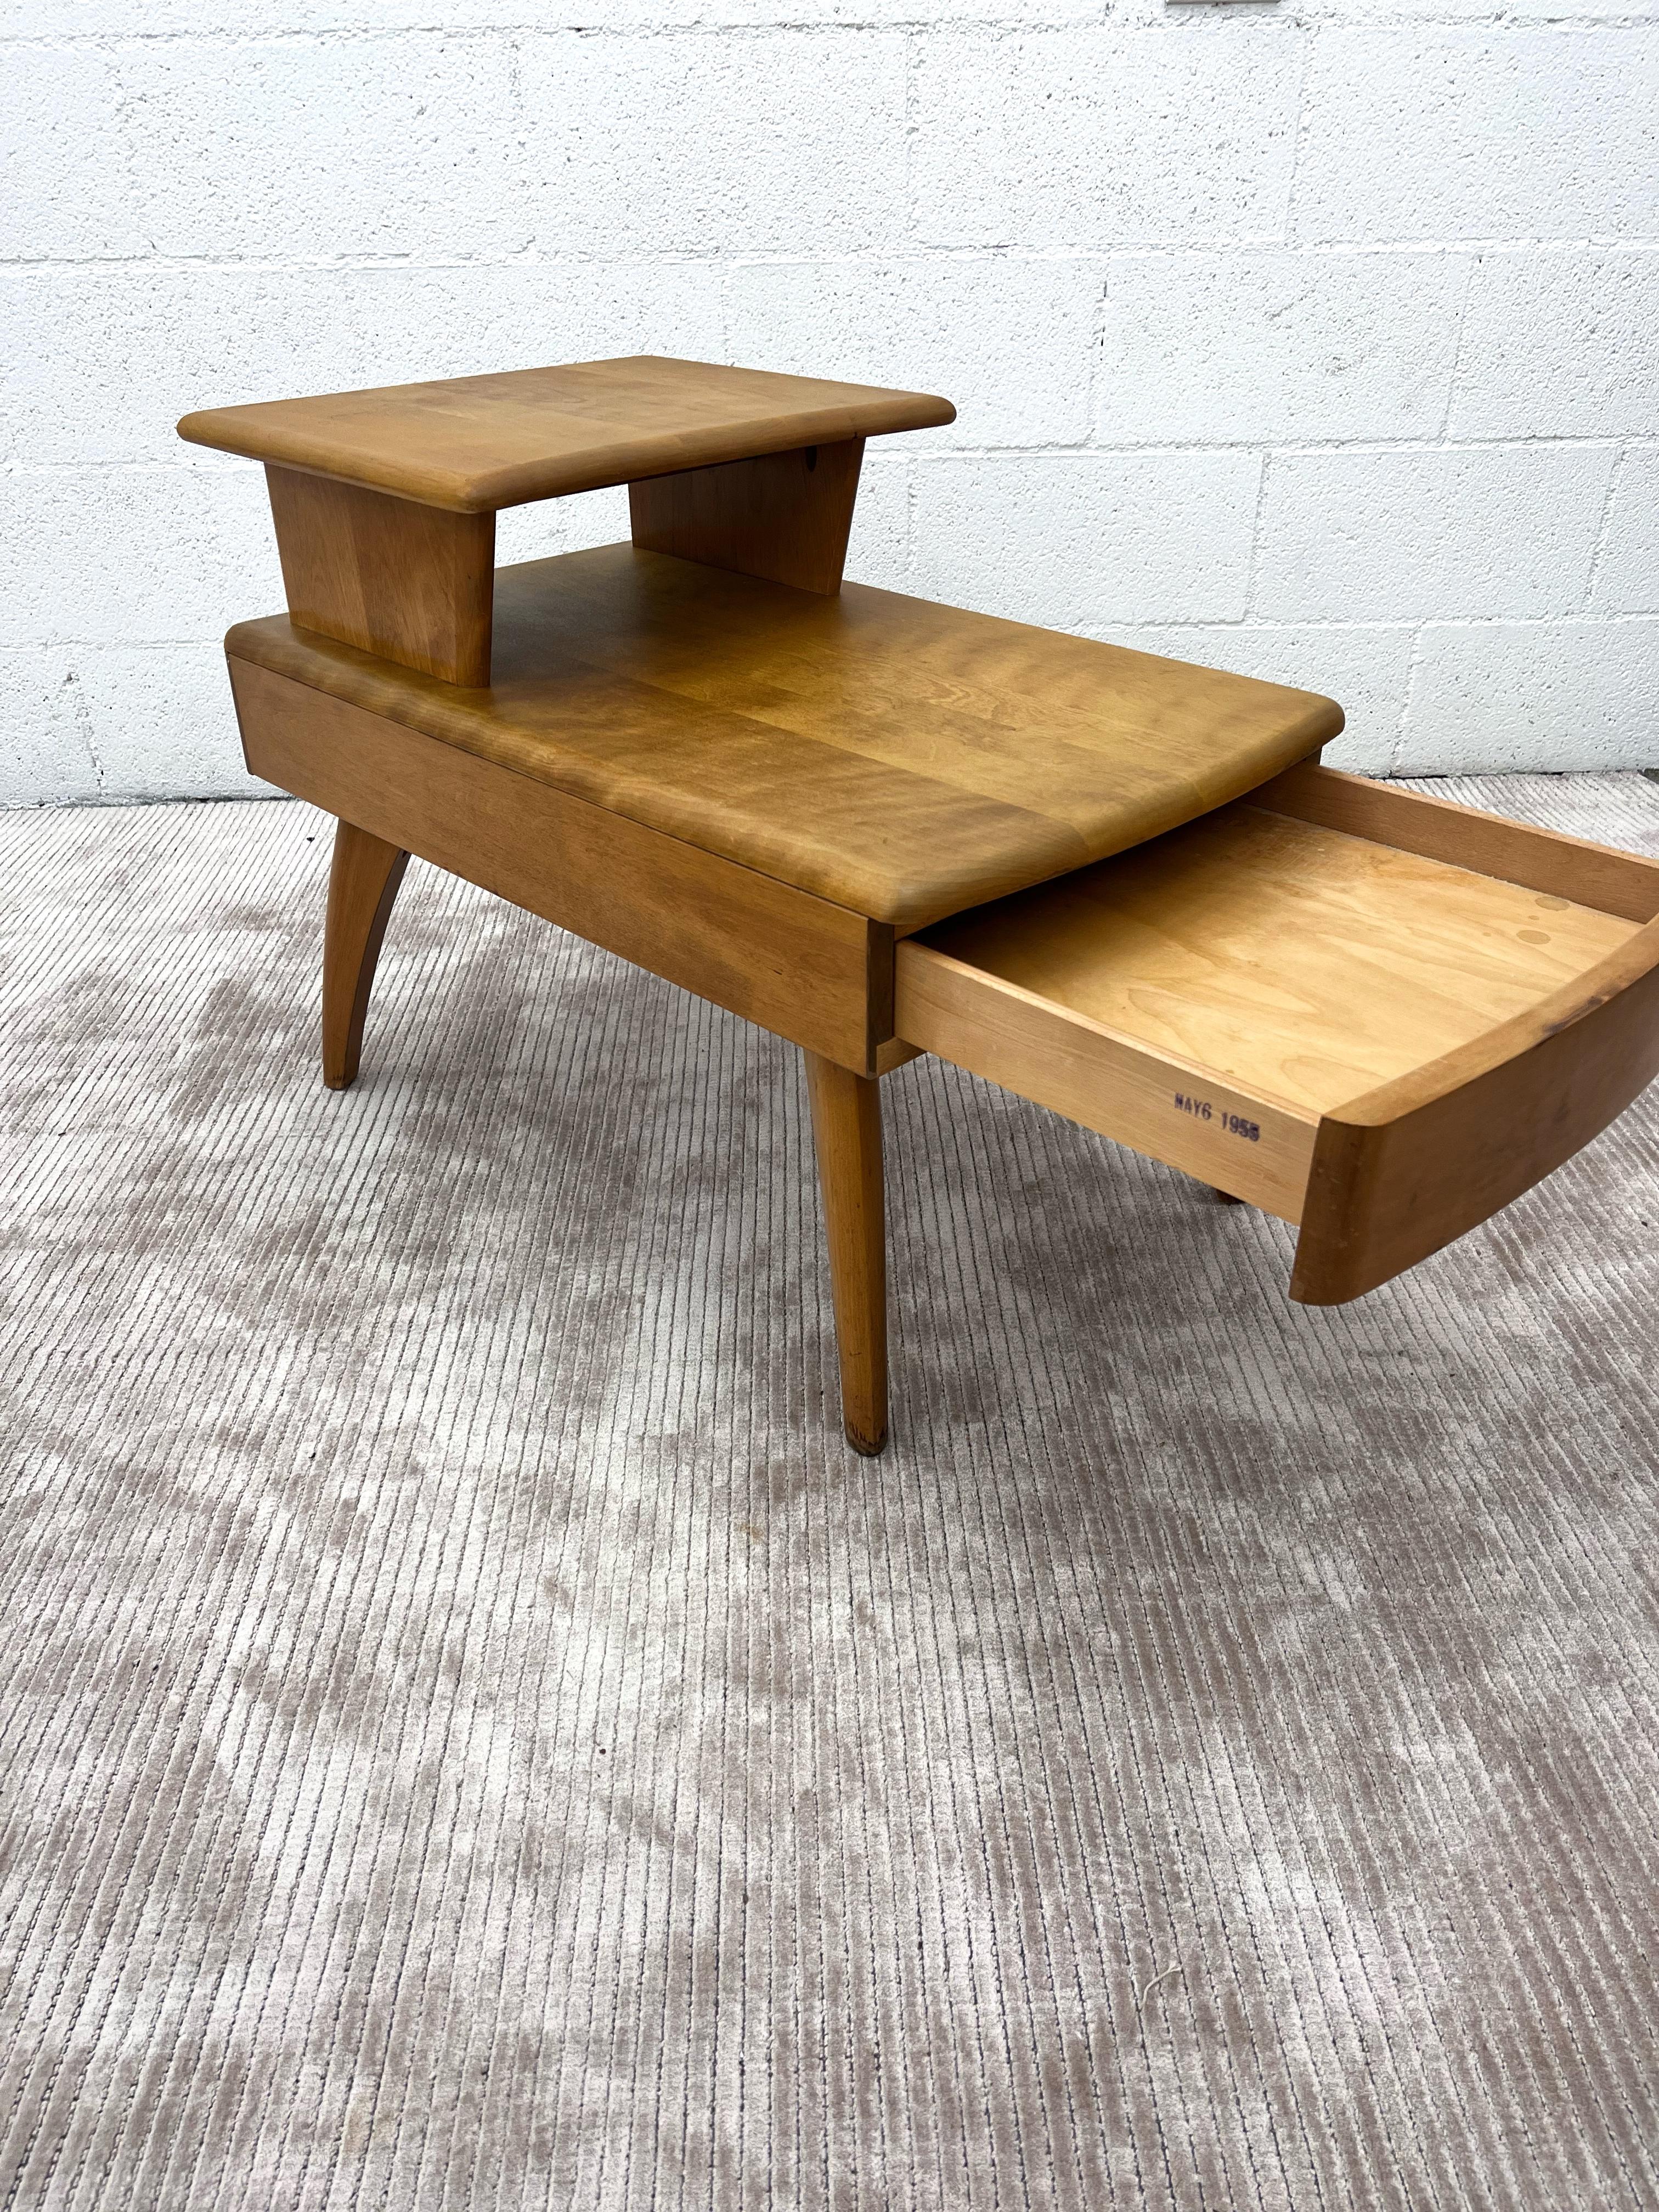 American Vintage Heywood Wakefield Mid Century modern 2 Tier Side Table with Drawer For Sale